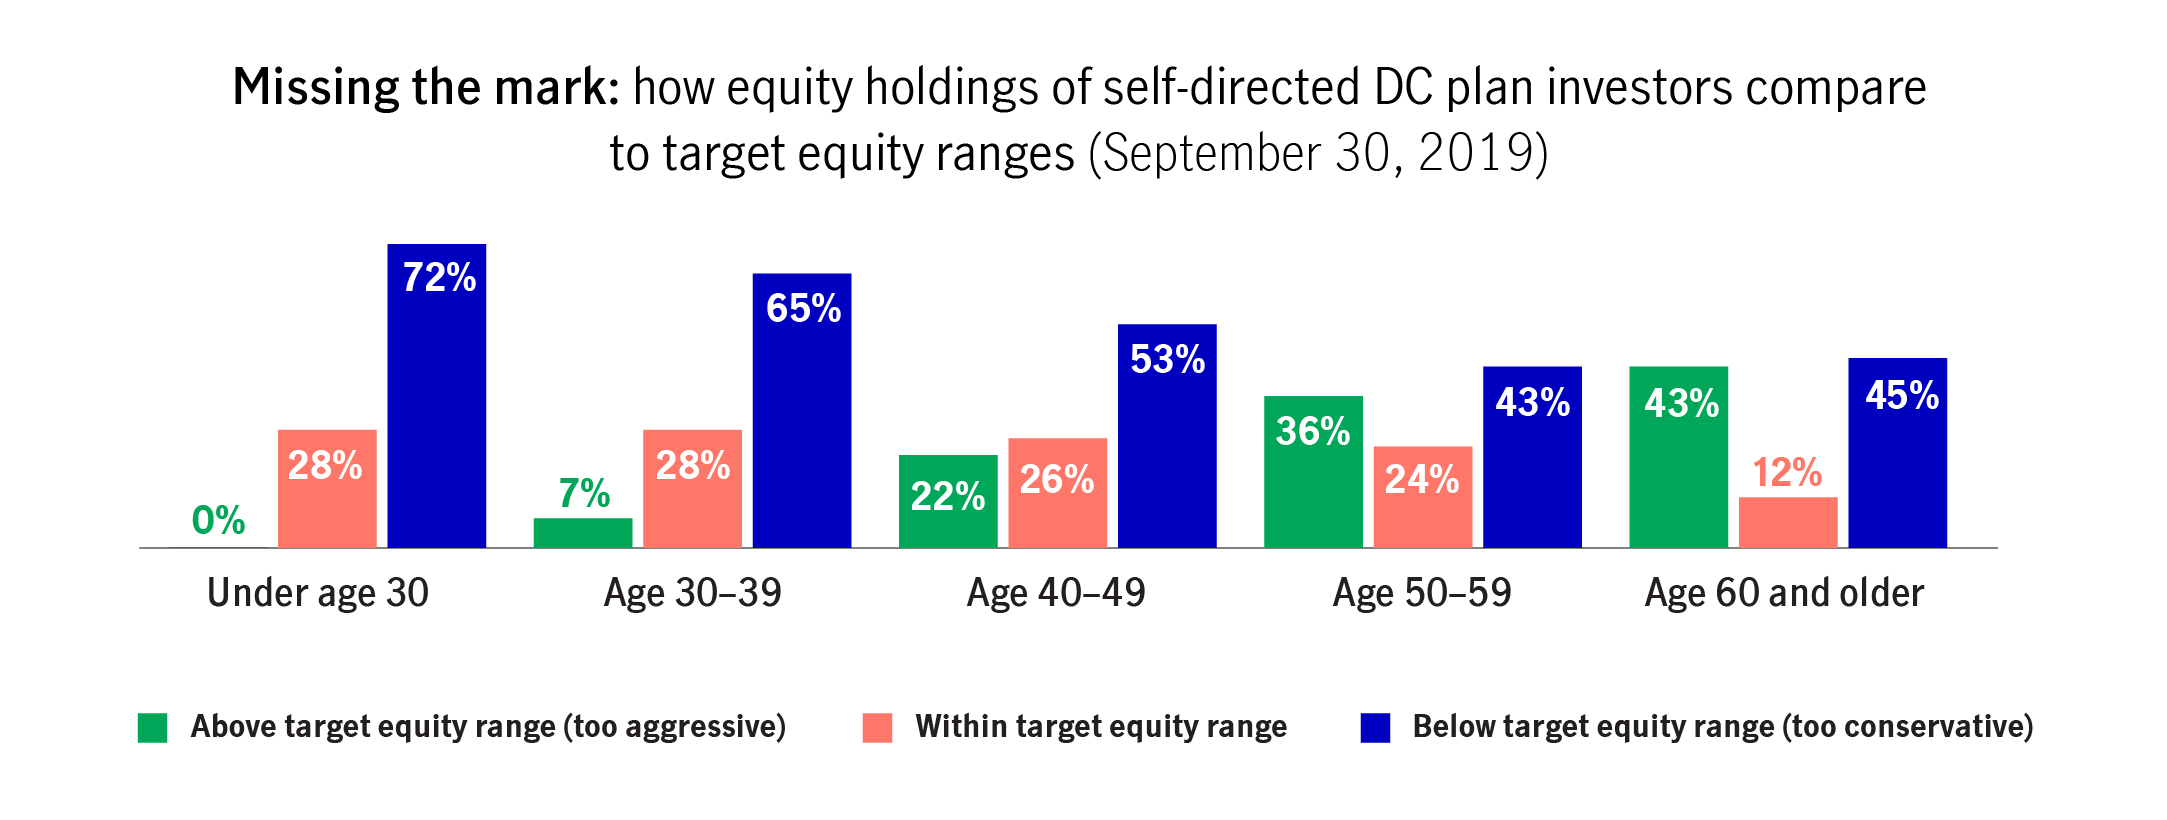 A series of bar charts showing how equity holdings of self-directed defined contribution plan investors compare to target equity ranges as of September 30, 2019. The charts show that the investor within their equity range generally fluctuate between 24 and 28 percent, except for those age 60 and older, of whom only  12% are on target. The charts also show that holding too little stock is far more likely than holding too little. 